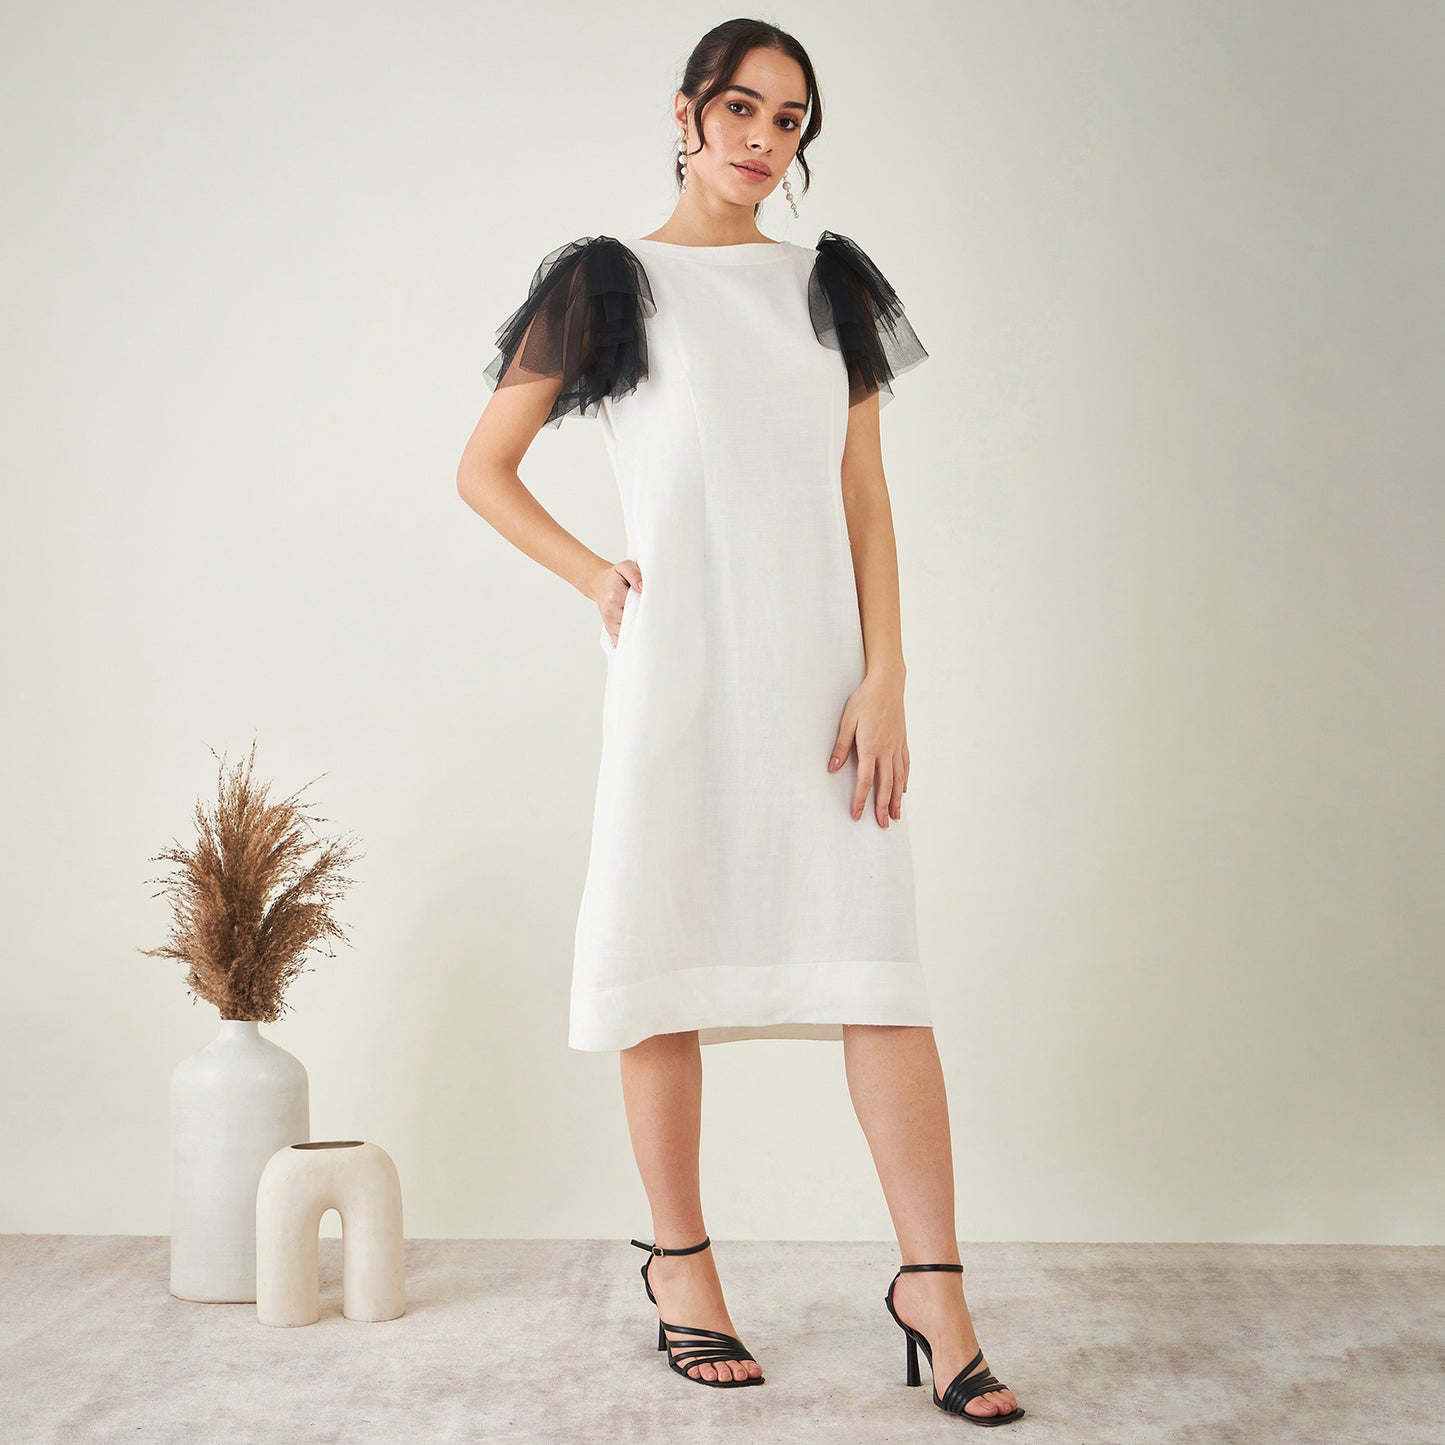 Off-White Linen Dress with Black Net Sleeves